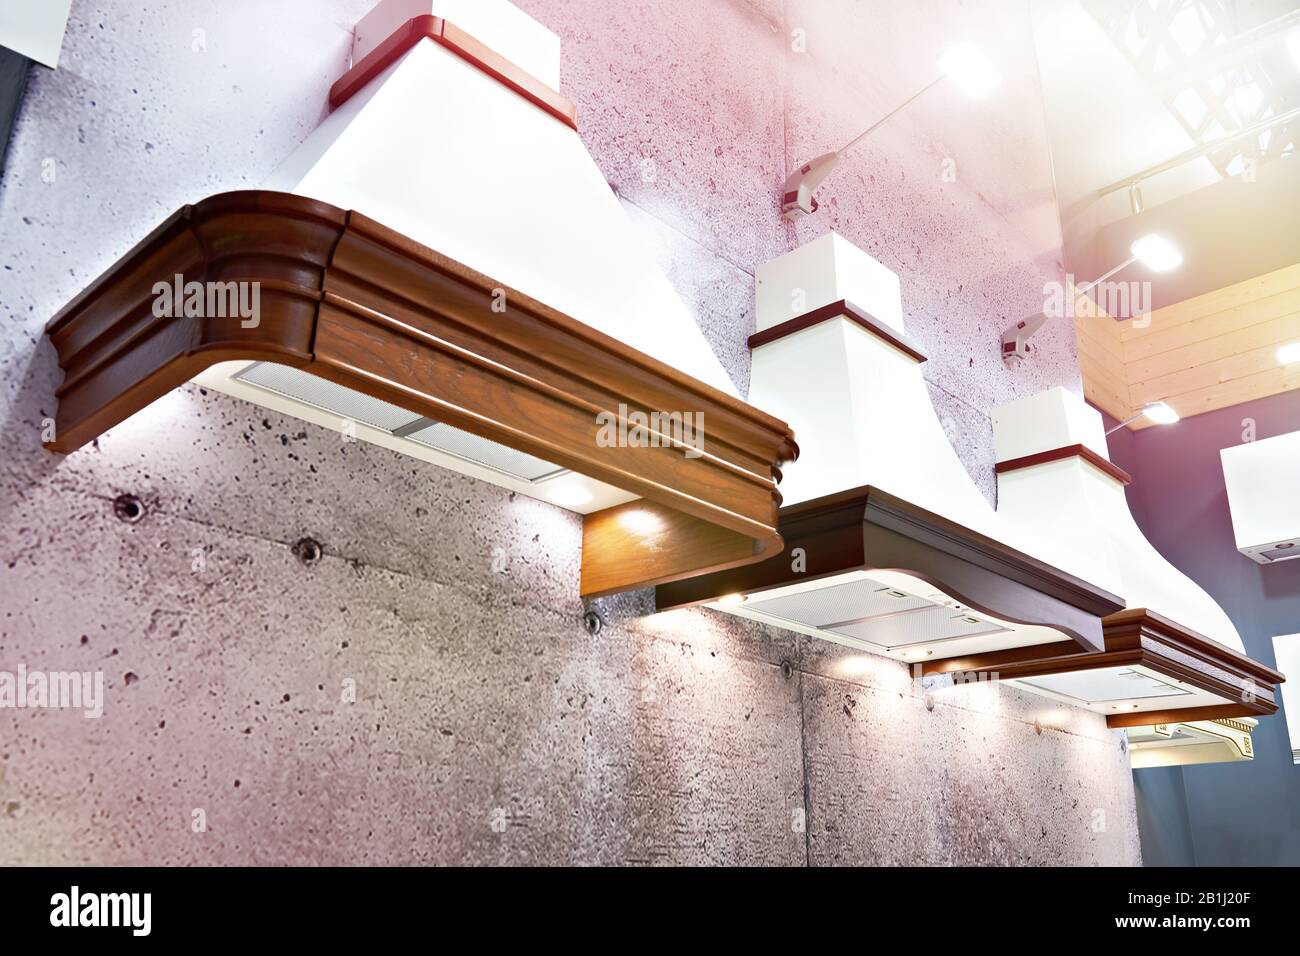 Department store selling kitchen hoods Stock Photo